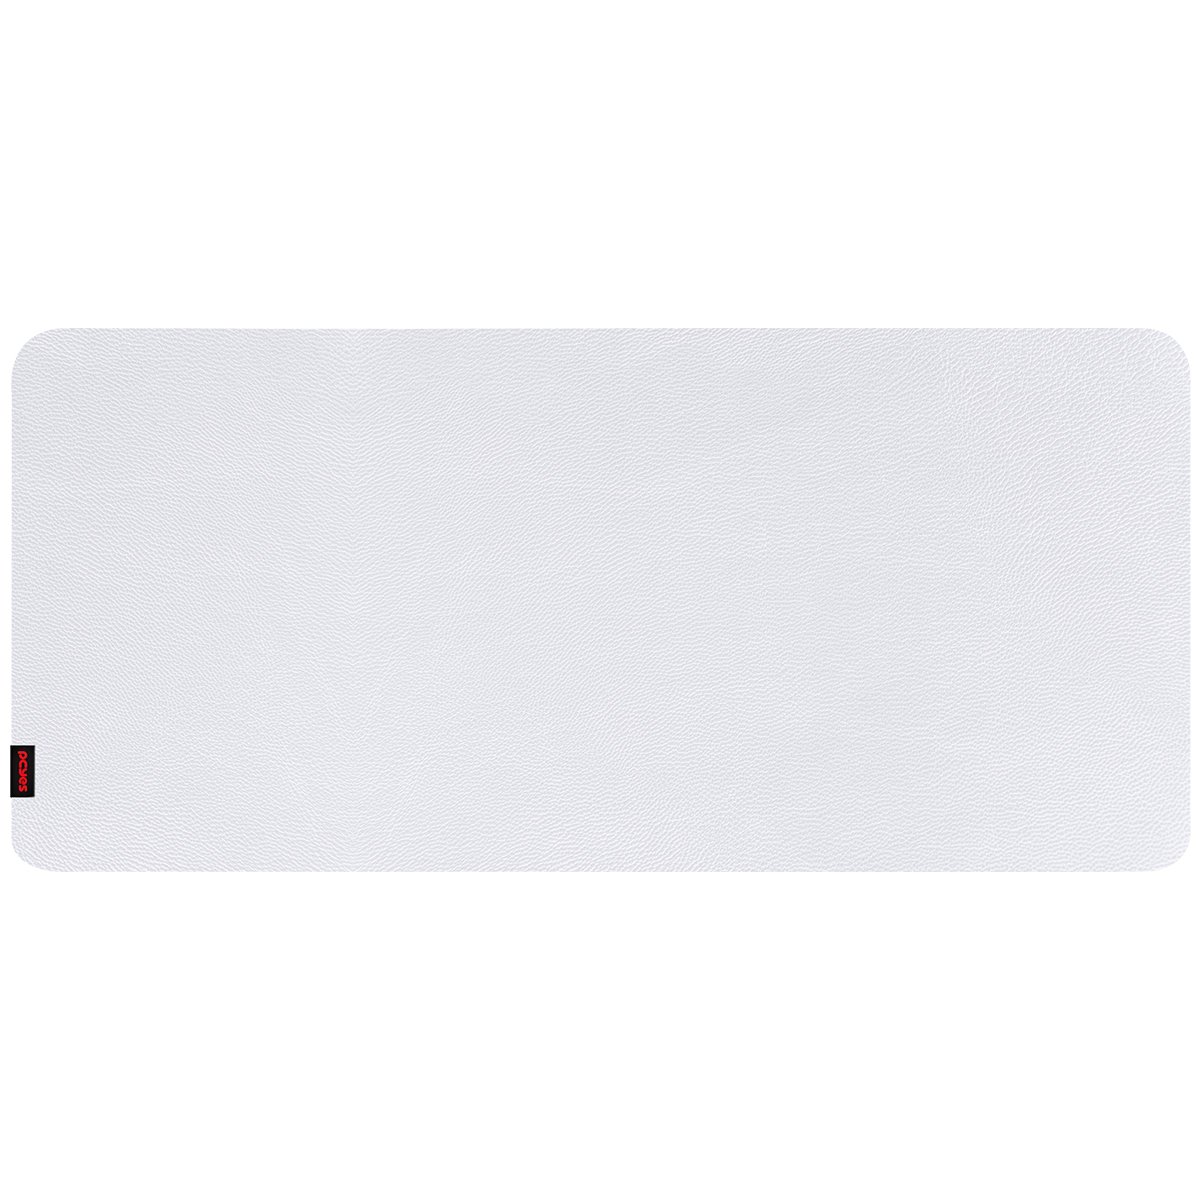 Mouse Pad Exclusive Branco 800x400 - Pmpexw - 1